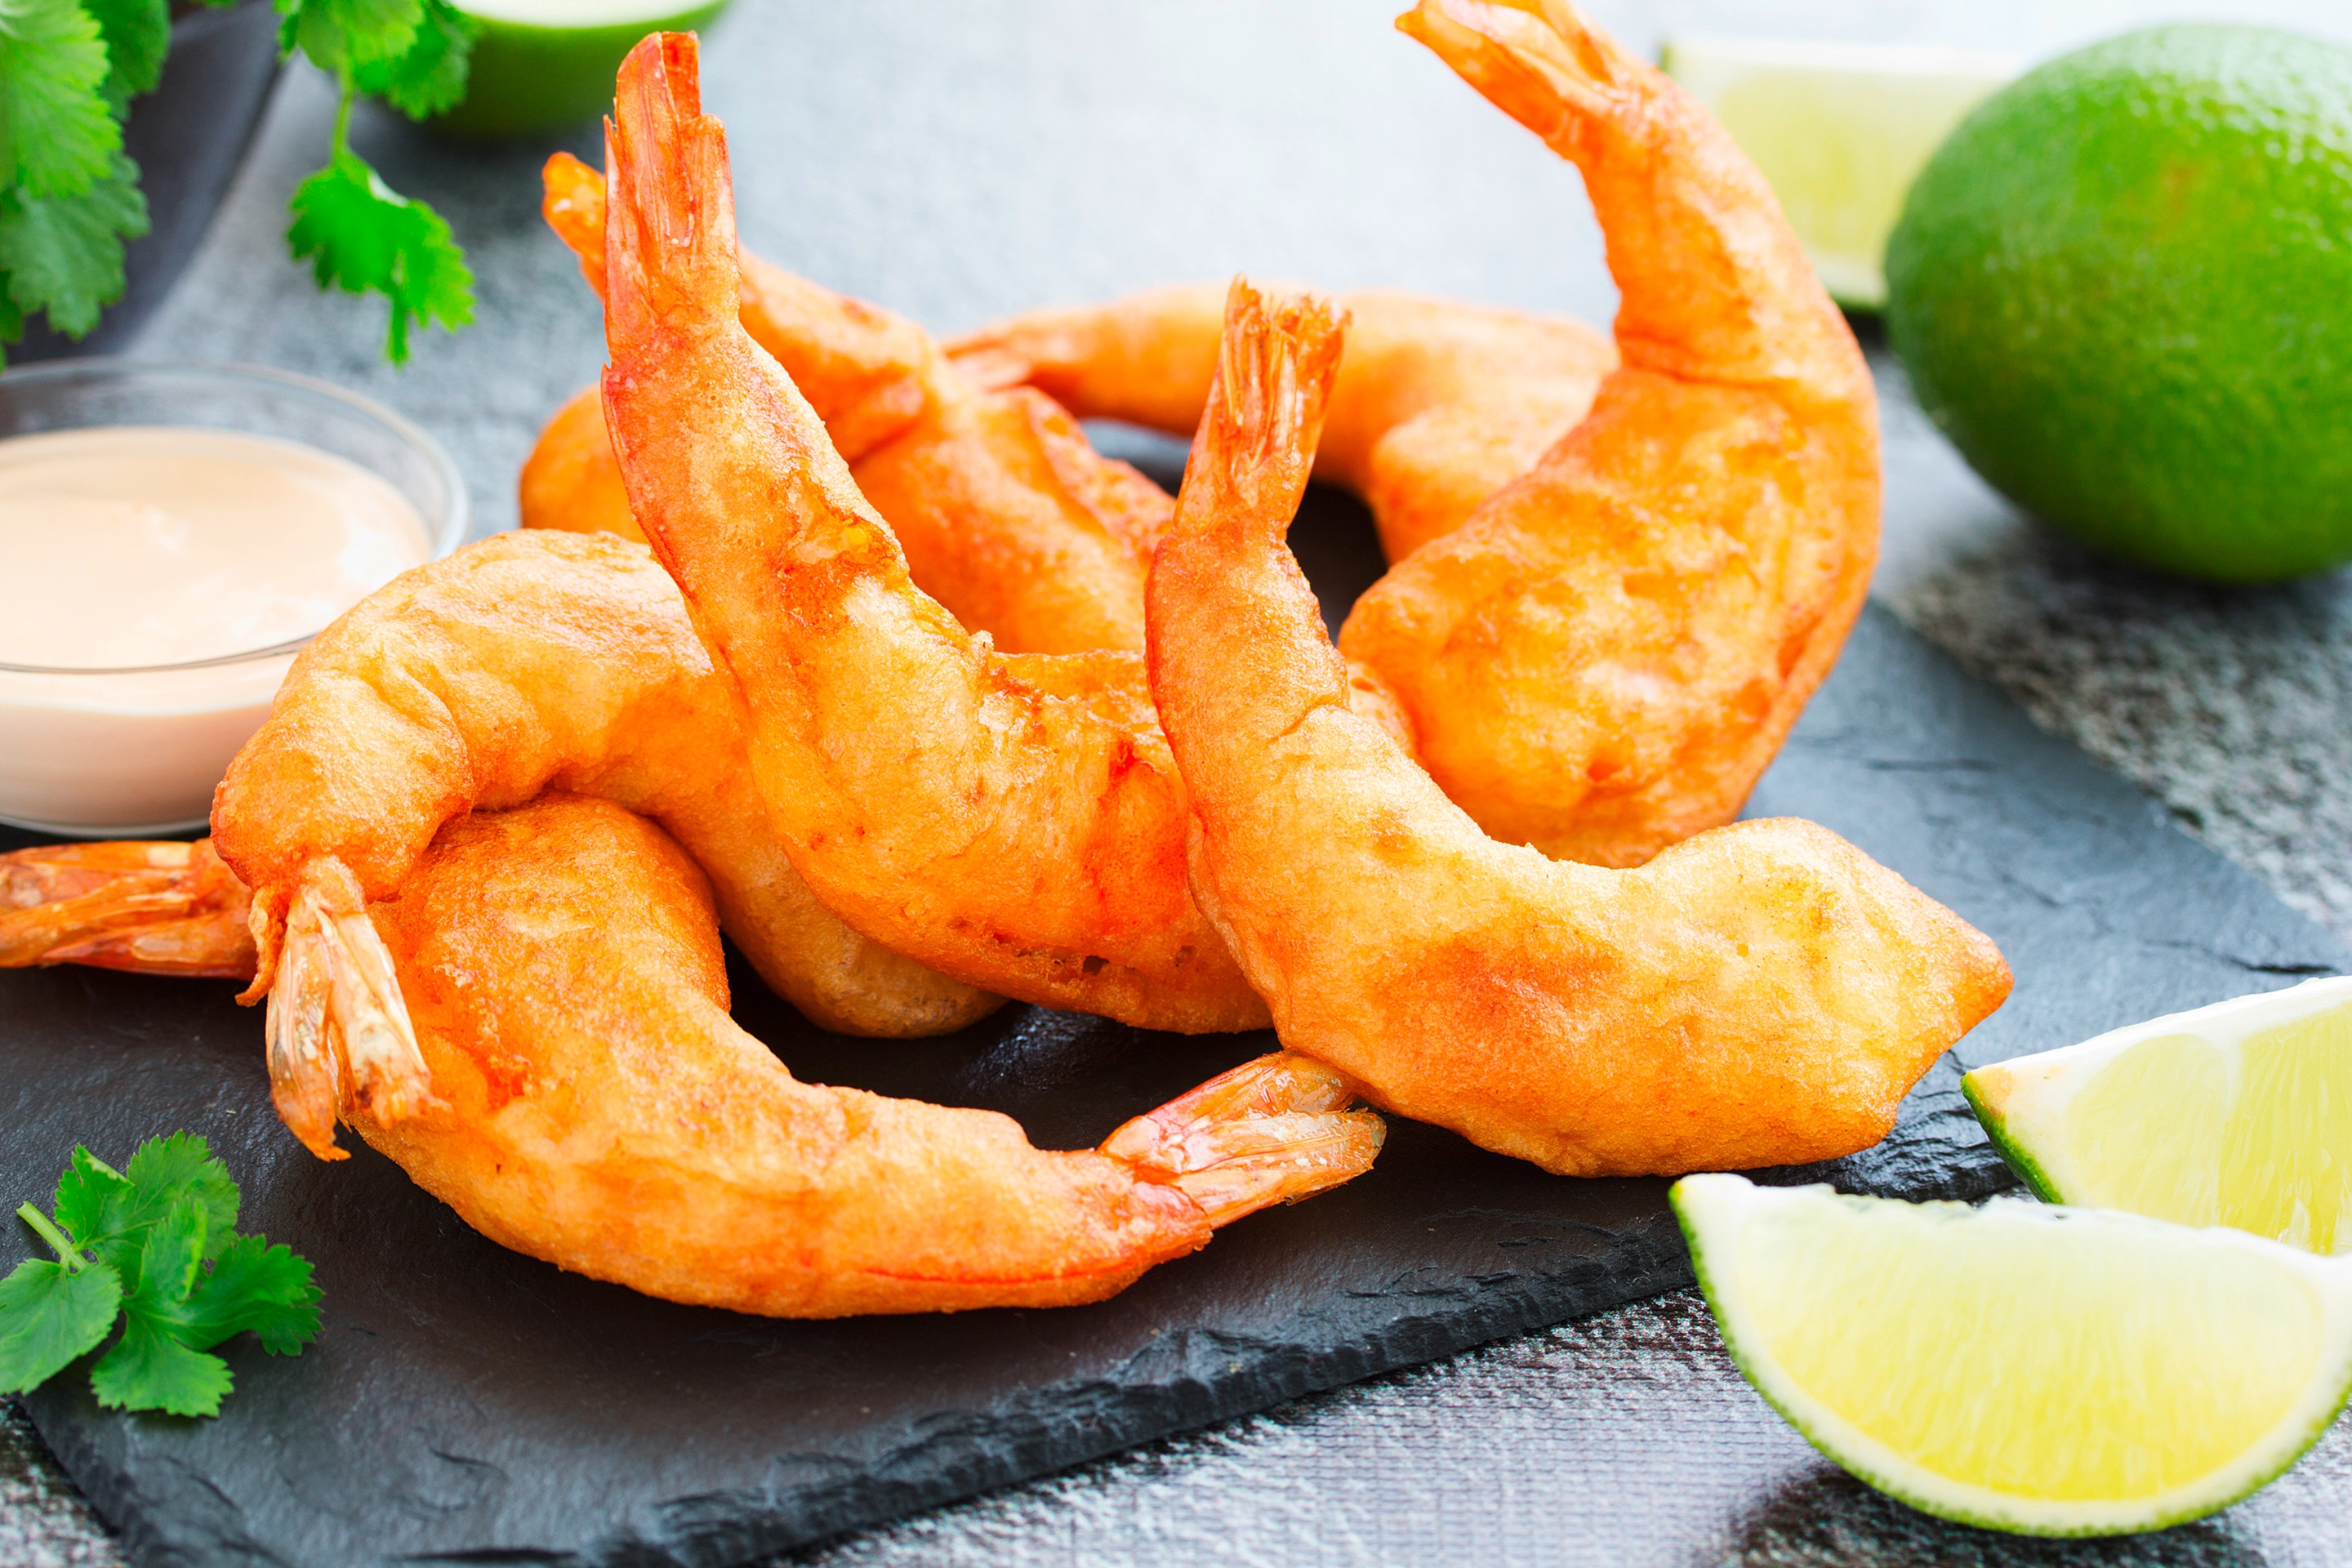 A serving of fried shrimp with fresh limes and a mayo dipping sauce